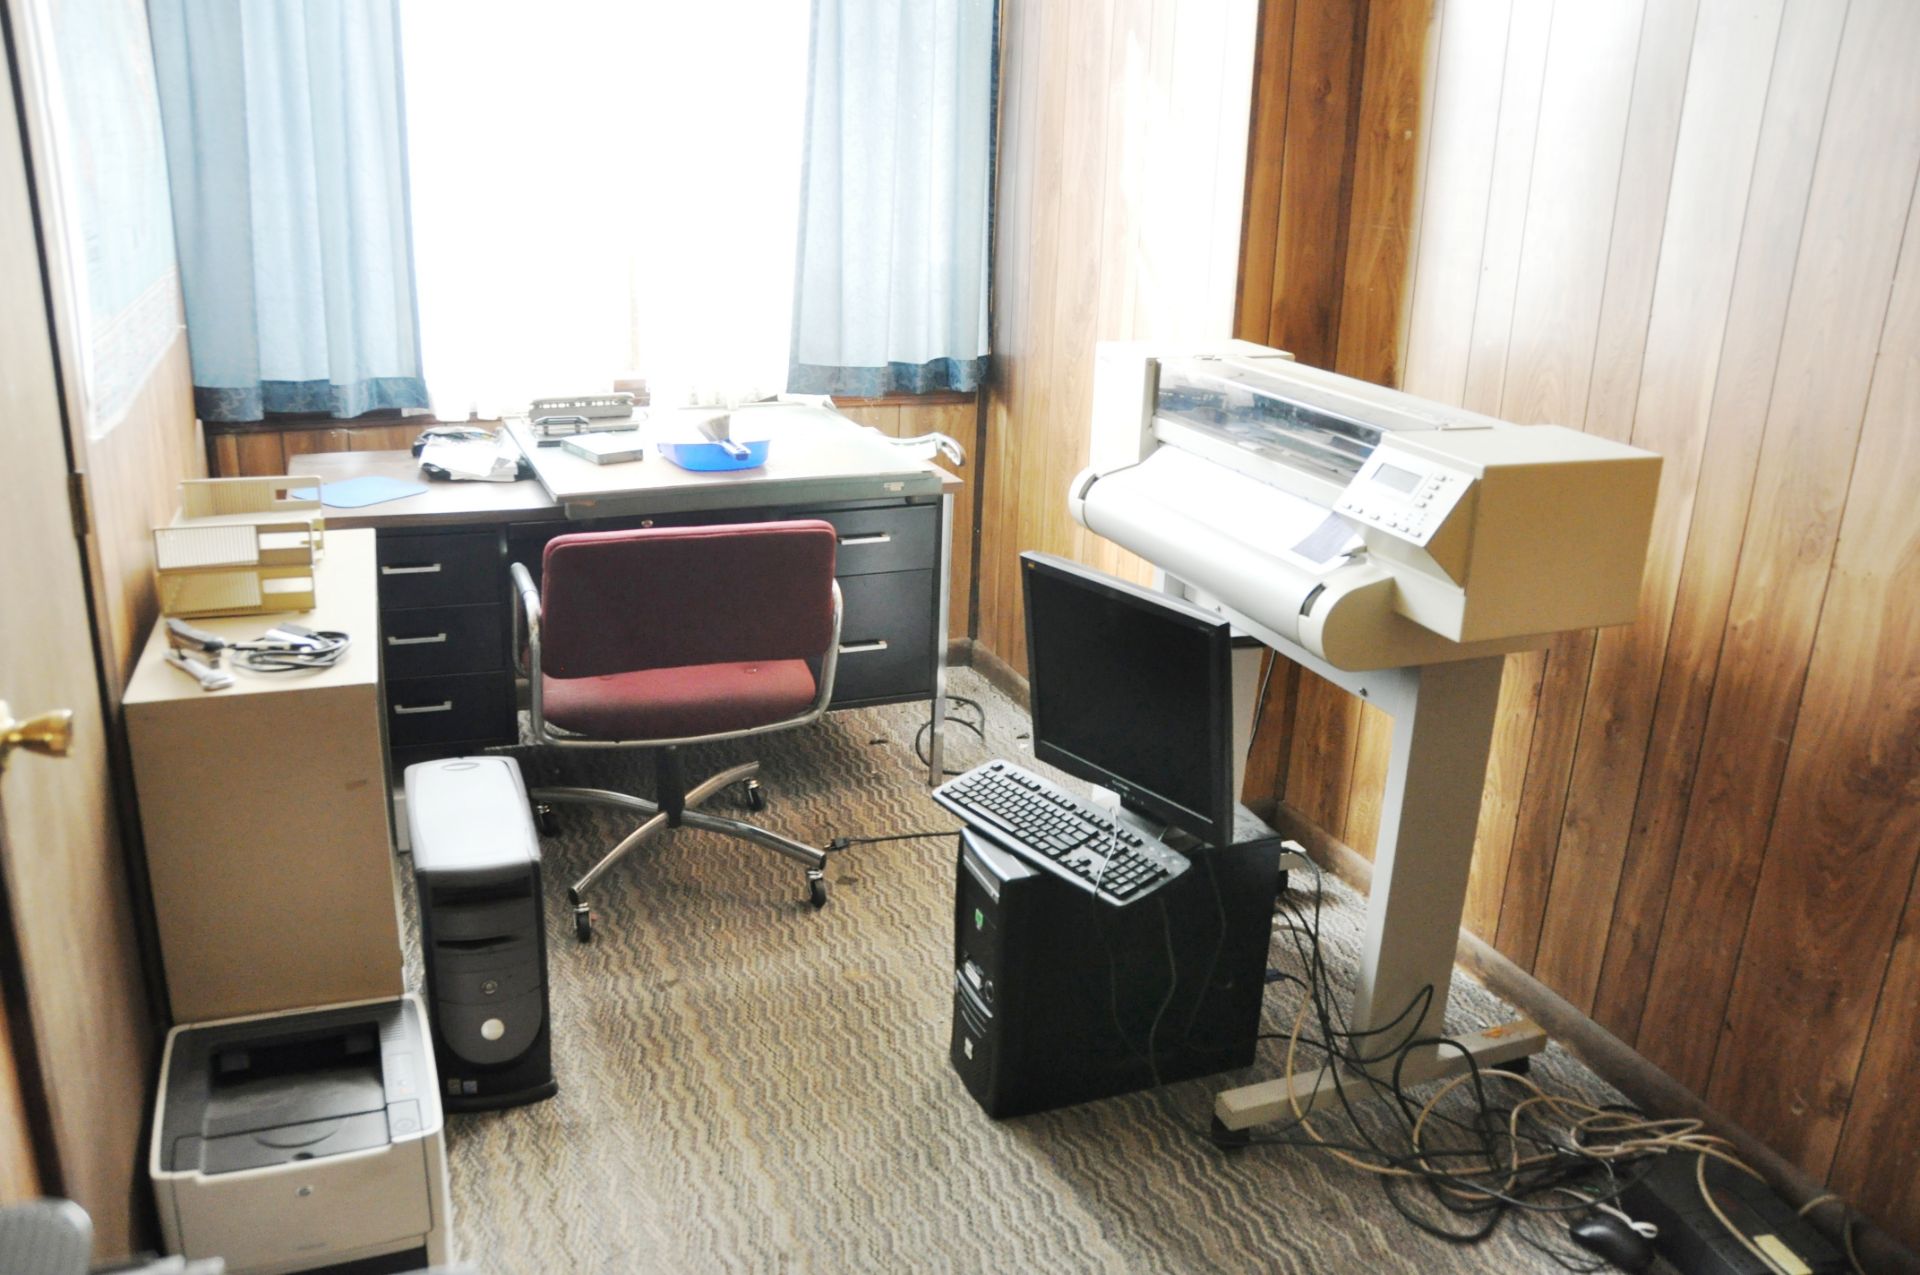 OFFICE CONTENTS: BIZHUB 200 COPIER, HP PRINTER, (2) COMPUTERS WITH ACCESSORIES…